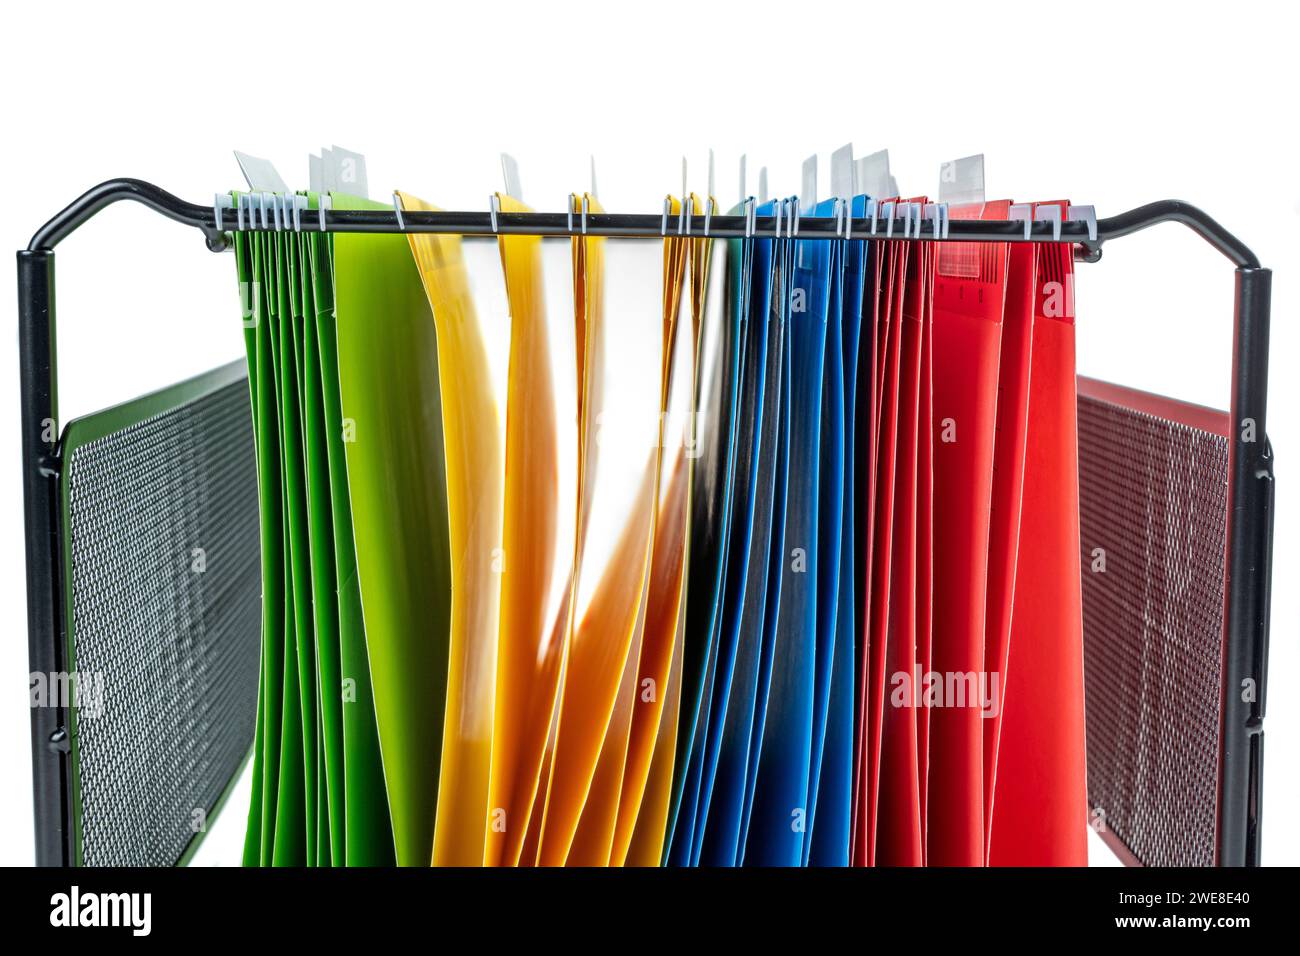 Closeup view of the colorful hanging file folder on the file organizer isolated over a white background Stock Photo